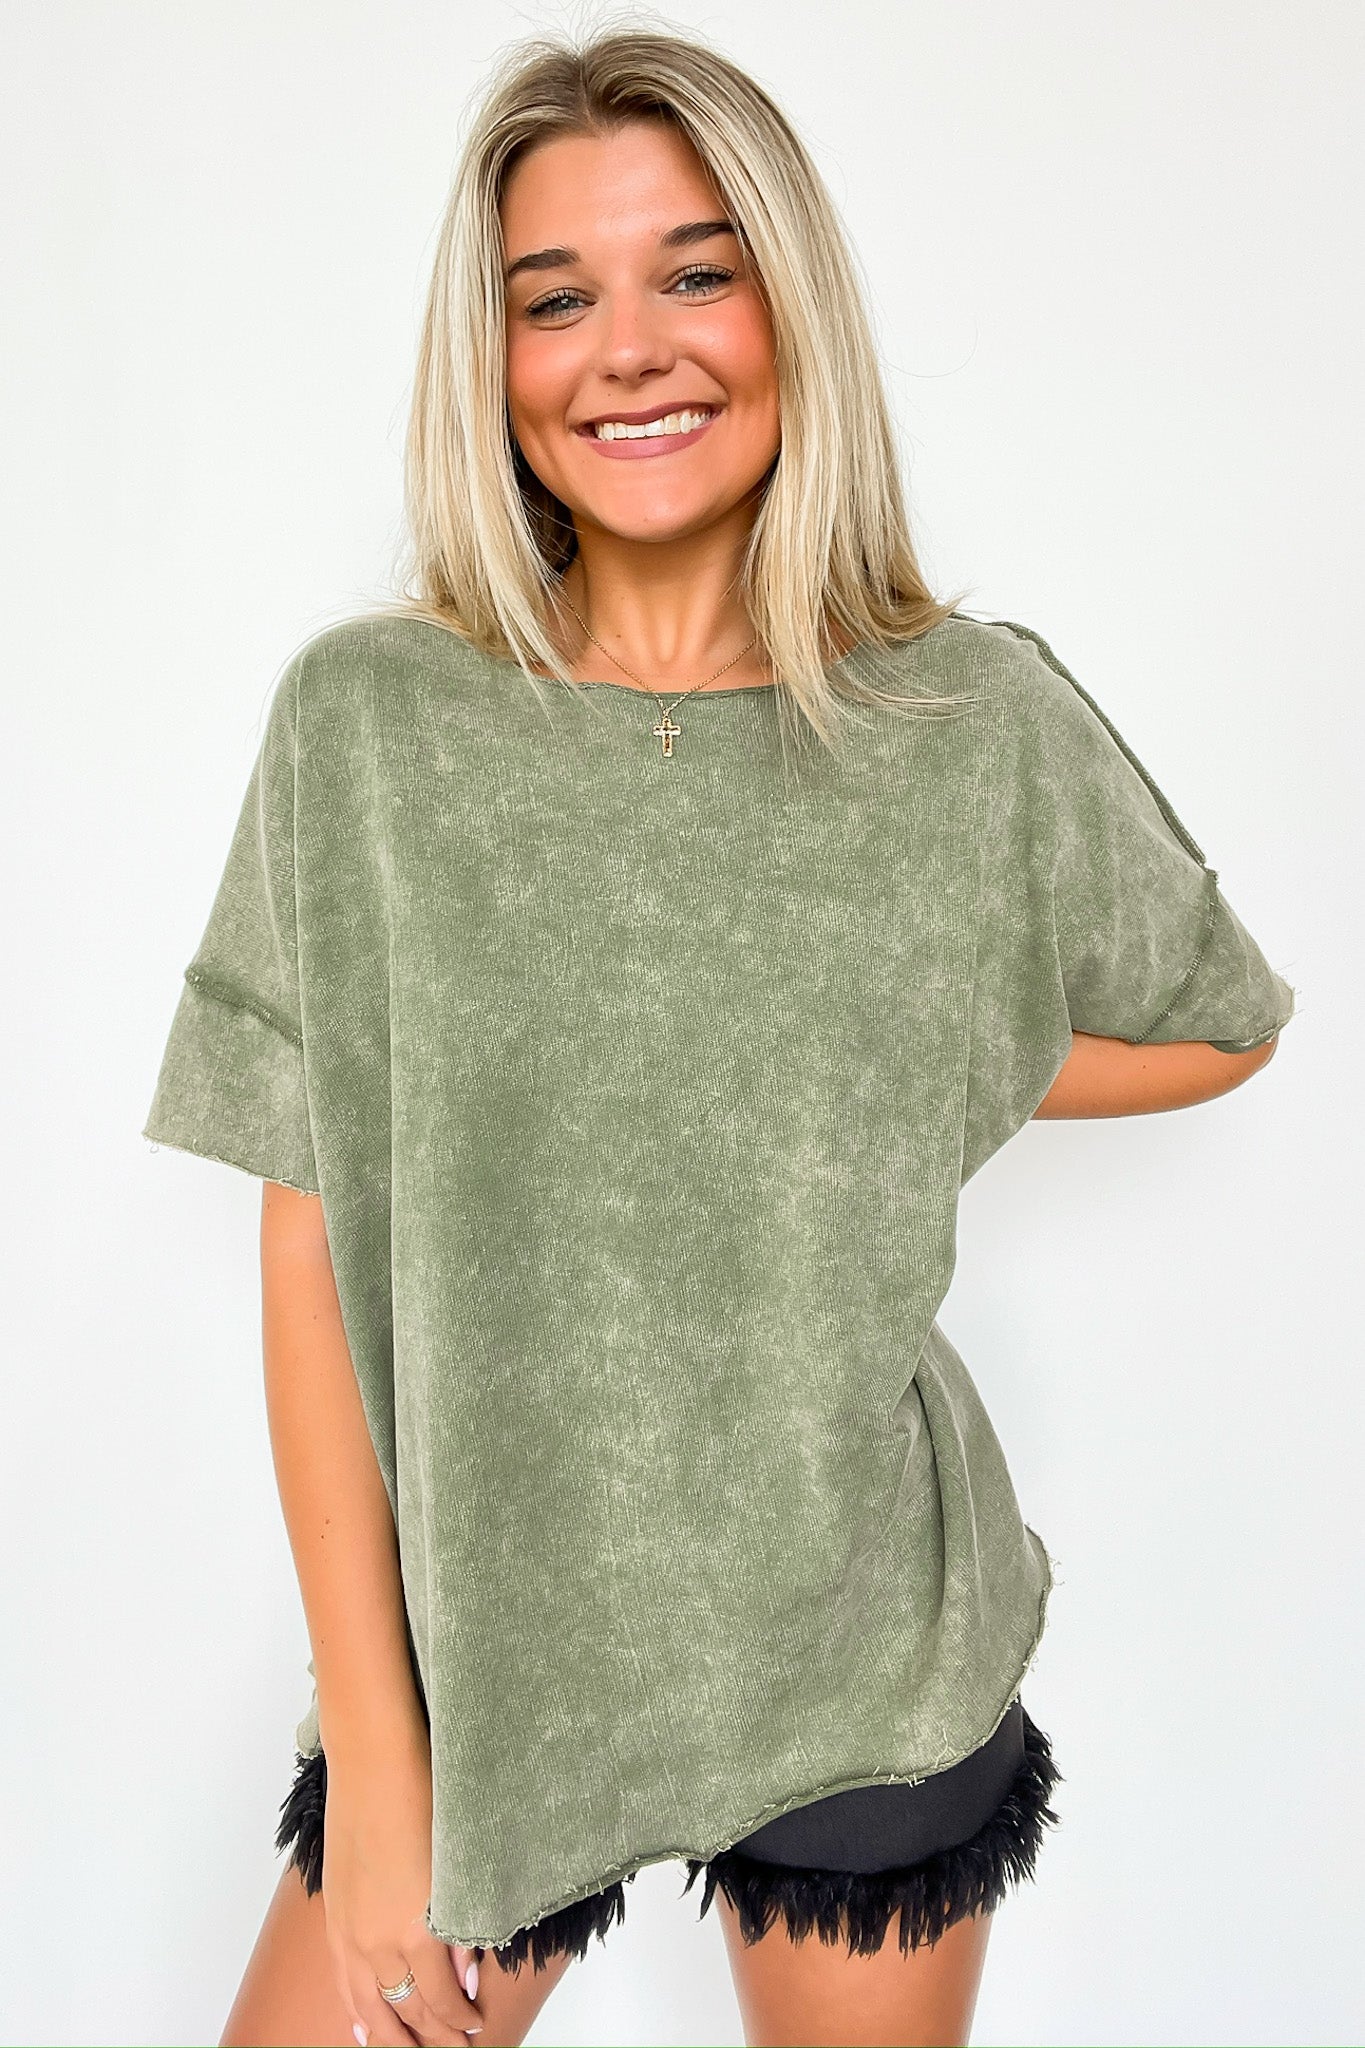 Ash Olive / SM Amayah Mineral Wash Raw Edge Top - BACK IN STOCK - Madison and Mallory